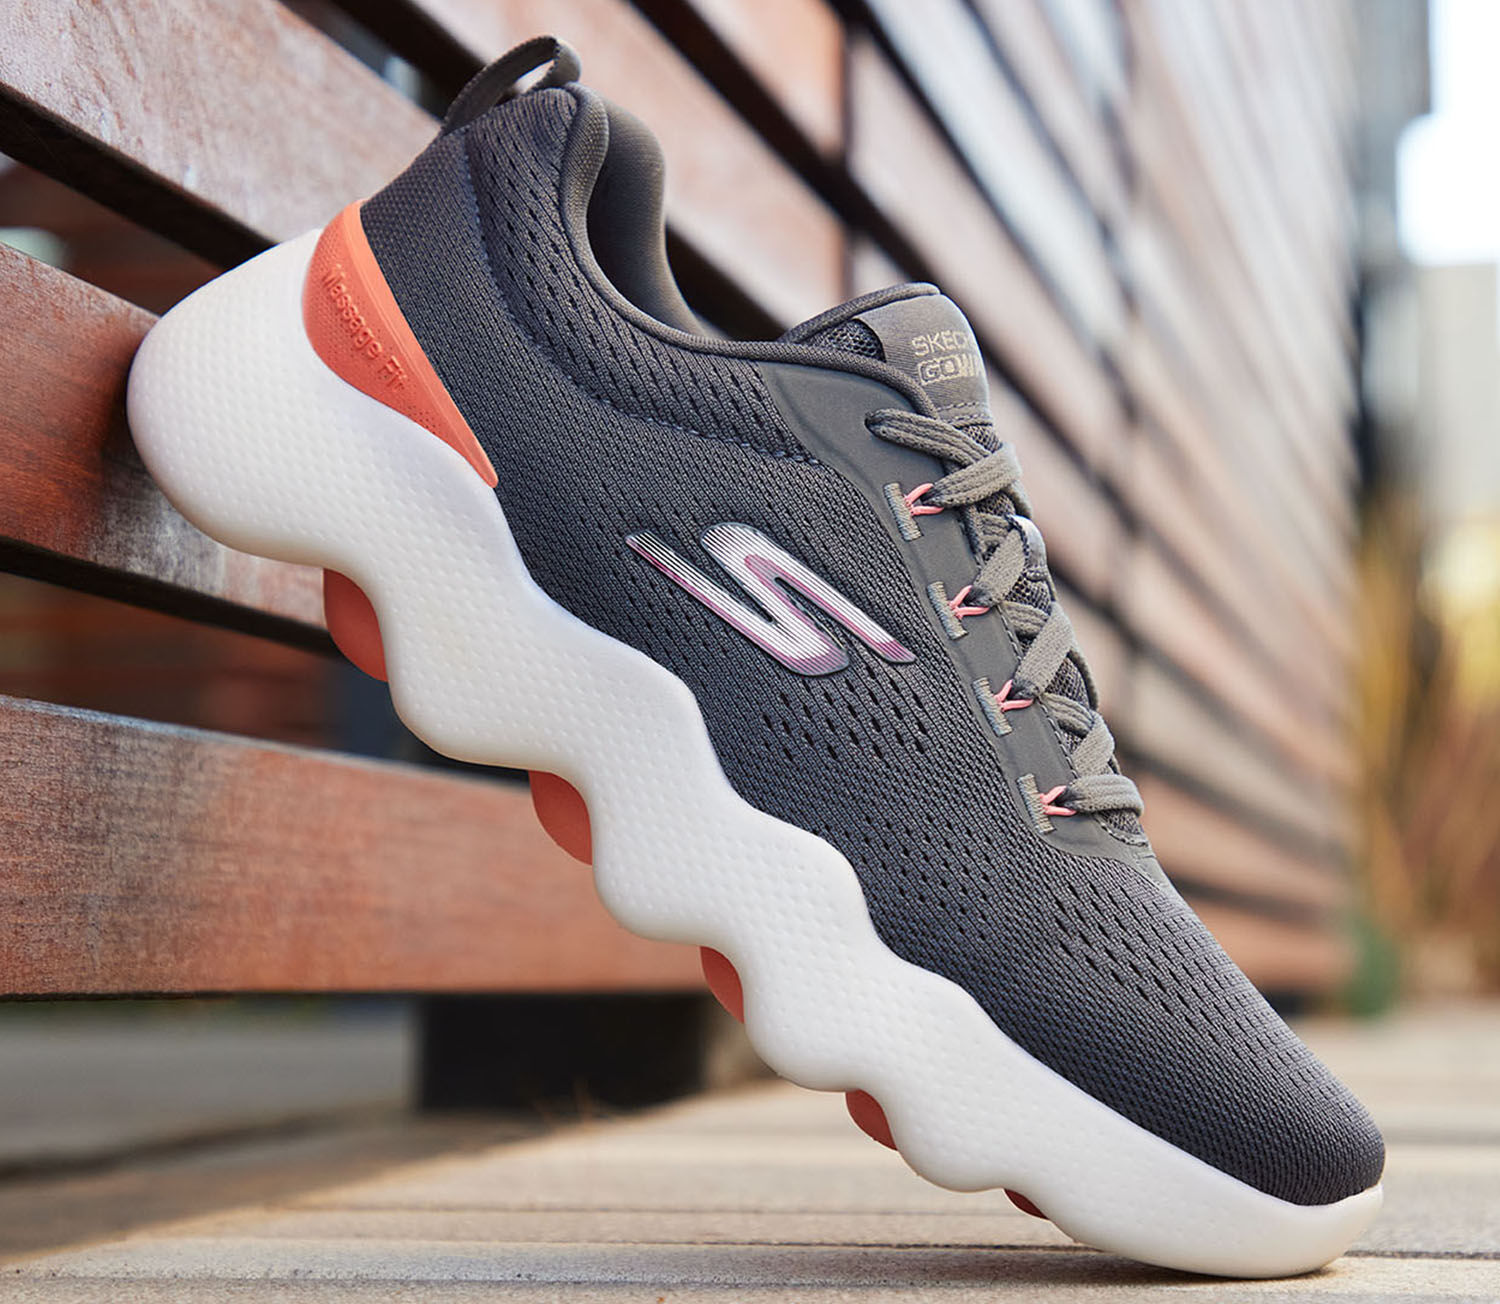 Skechers' promotes walking as a workout with its new GO Walk collection -  Brand Wagon News